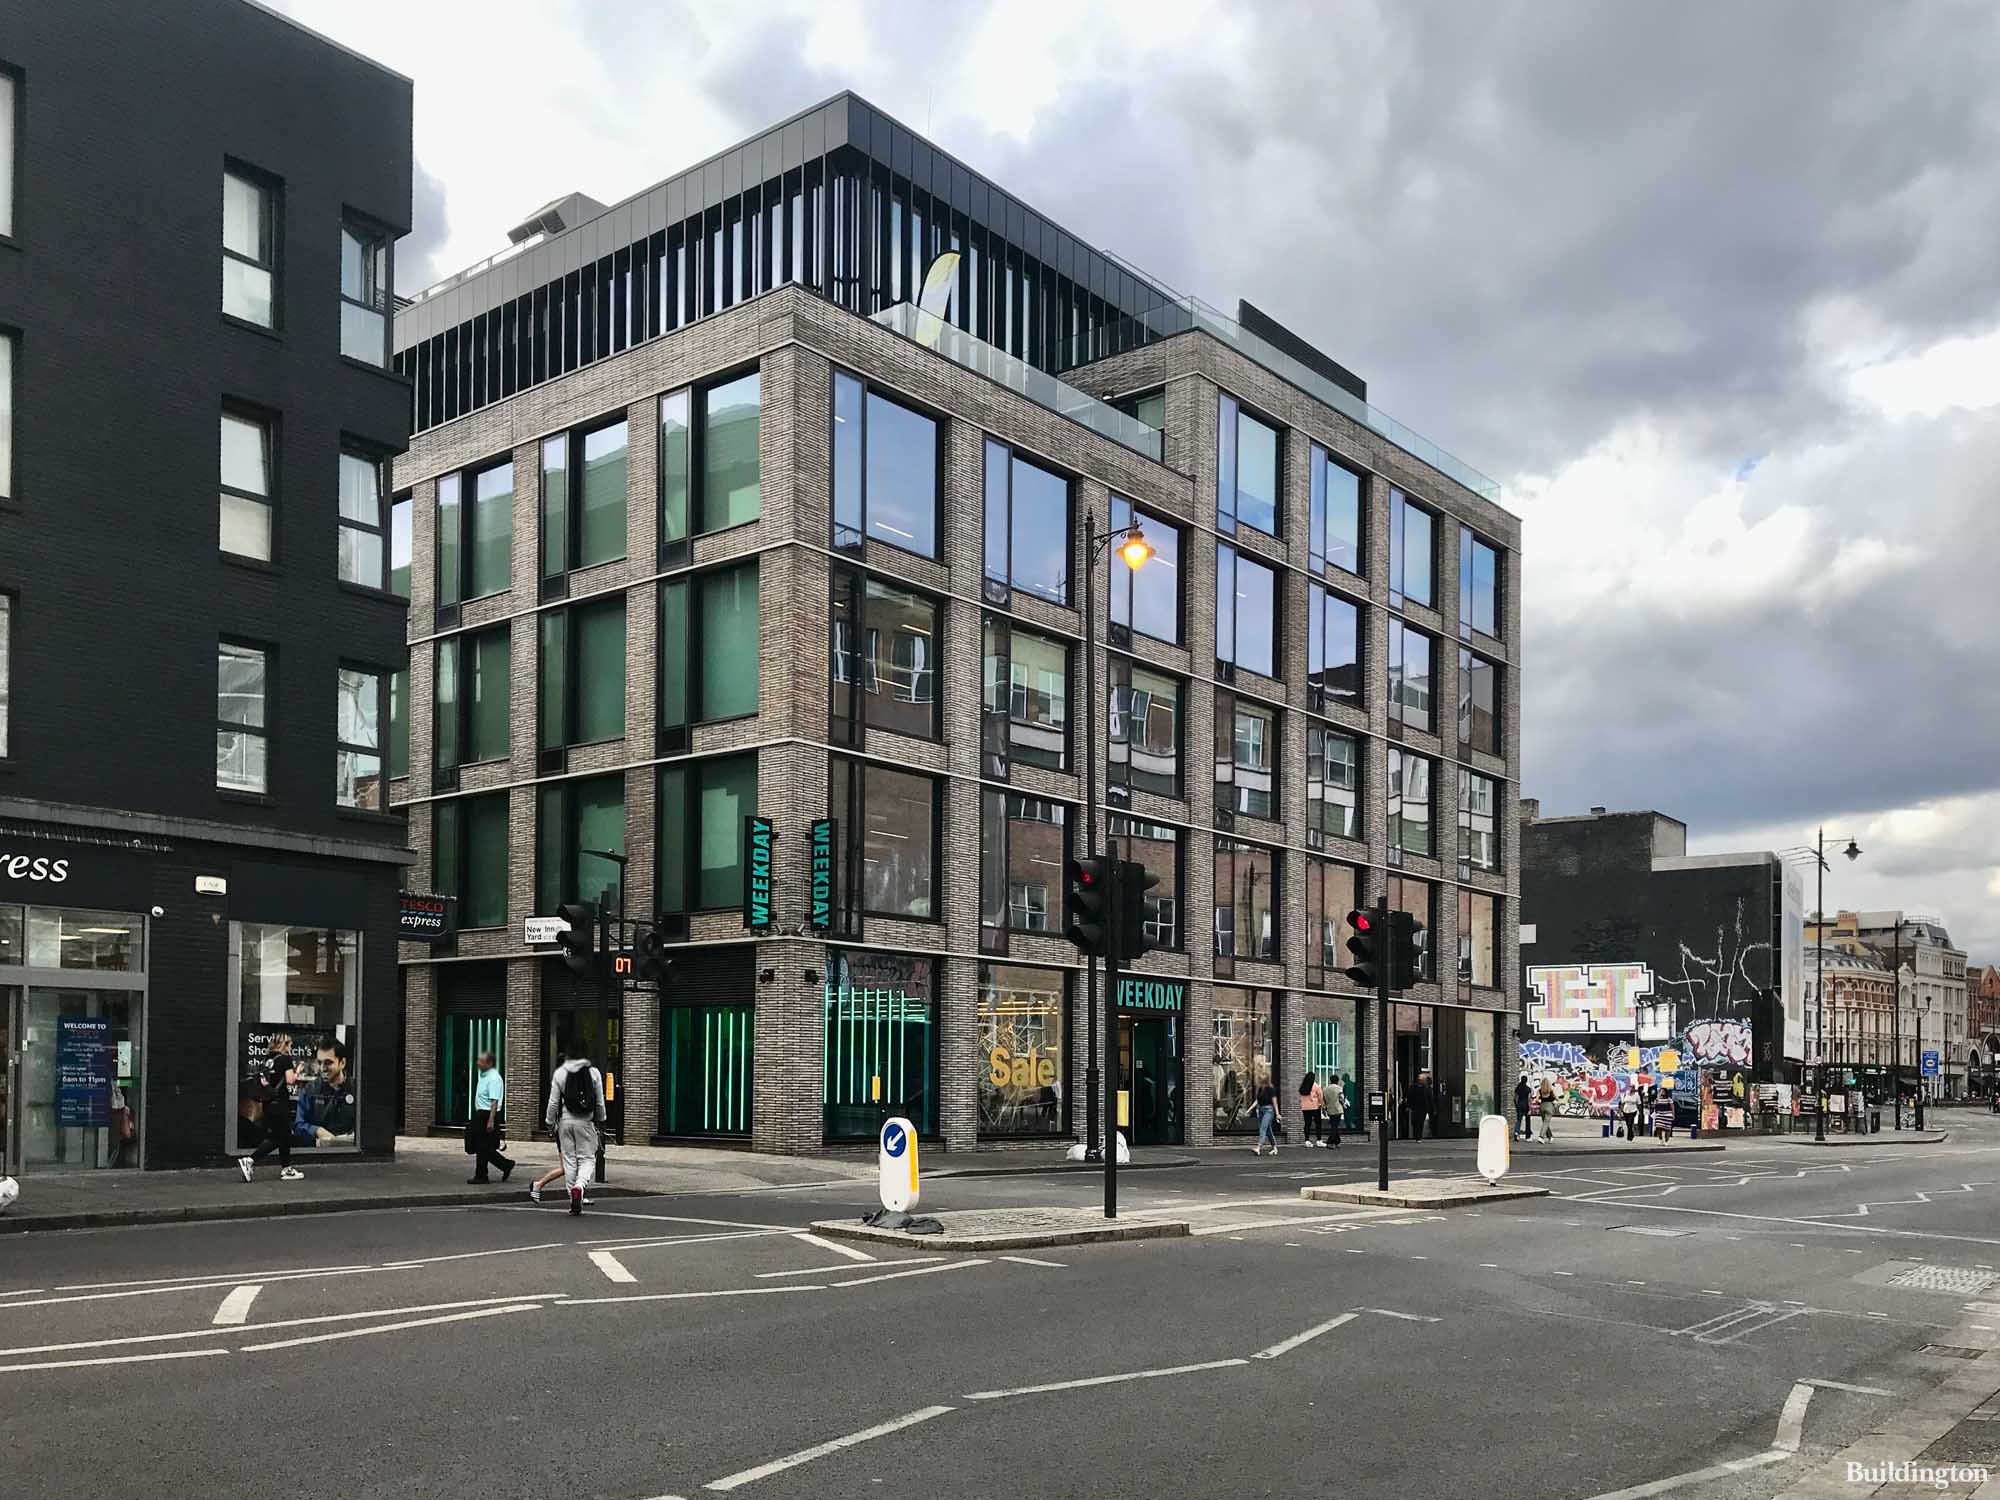 Weekday at unit 7 of 168 Shoreditch High Street in London E1. Building designed by 21st Architecture.